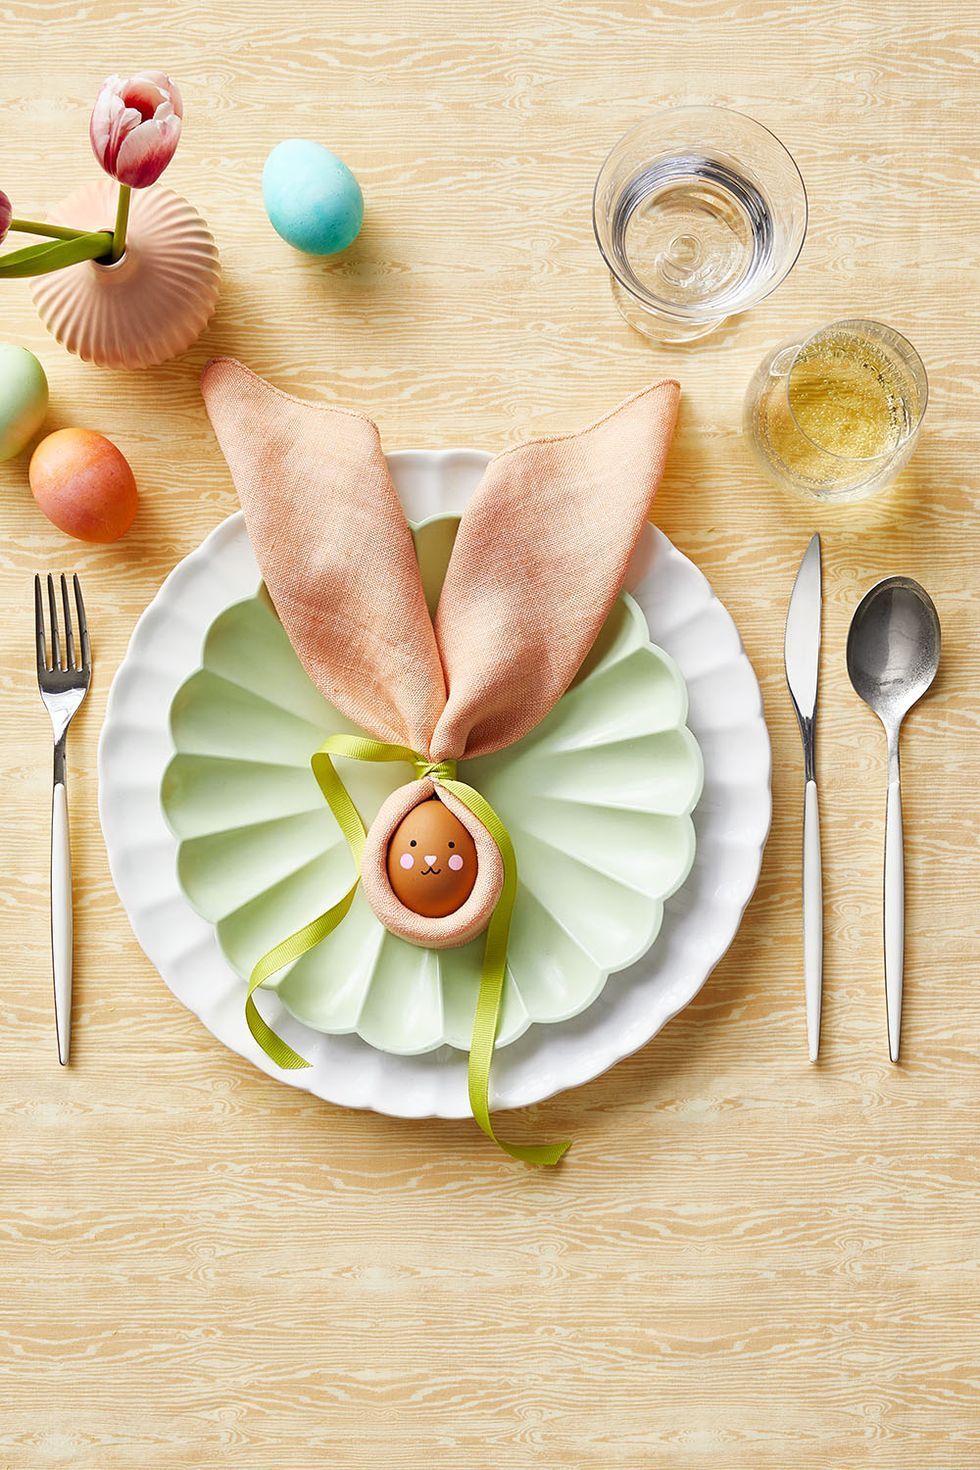 https://hips.hearstapps.com/hmg-prod/images/easter-table-decorations-bunny-place-setting-1644330834.jpeg